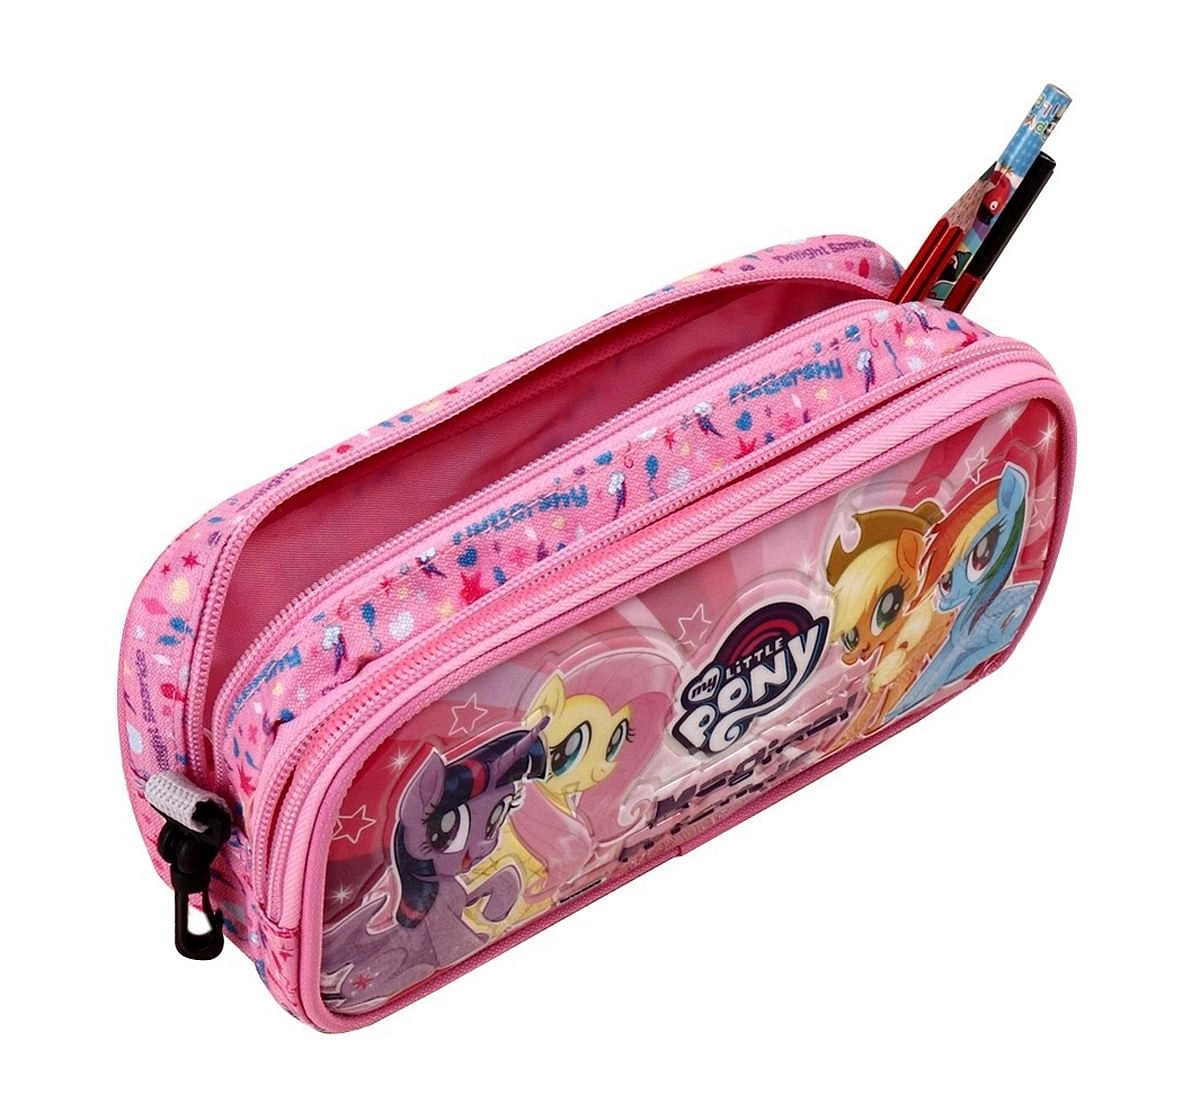 Hasbro My Little Pony Pink Double Zip Pouch Pink 3Y+